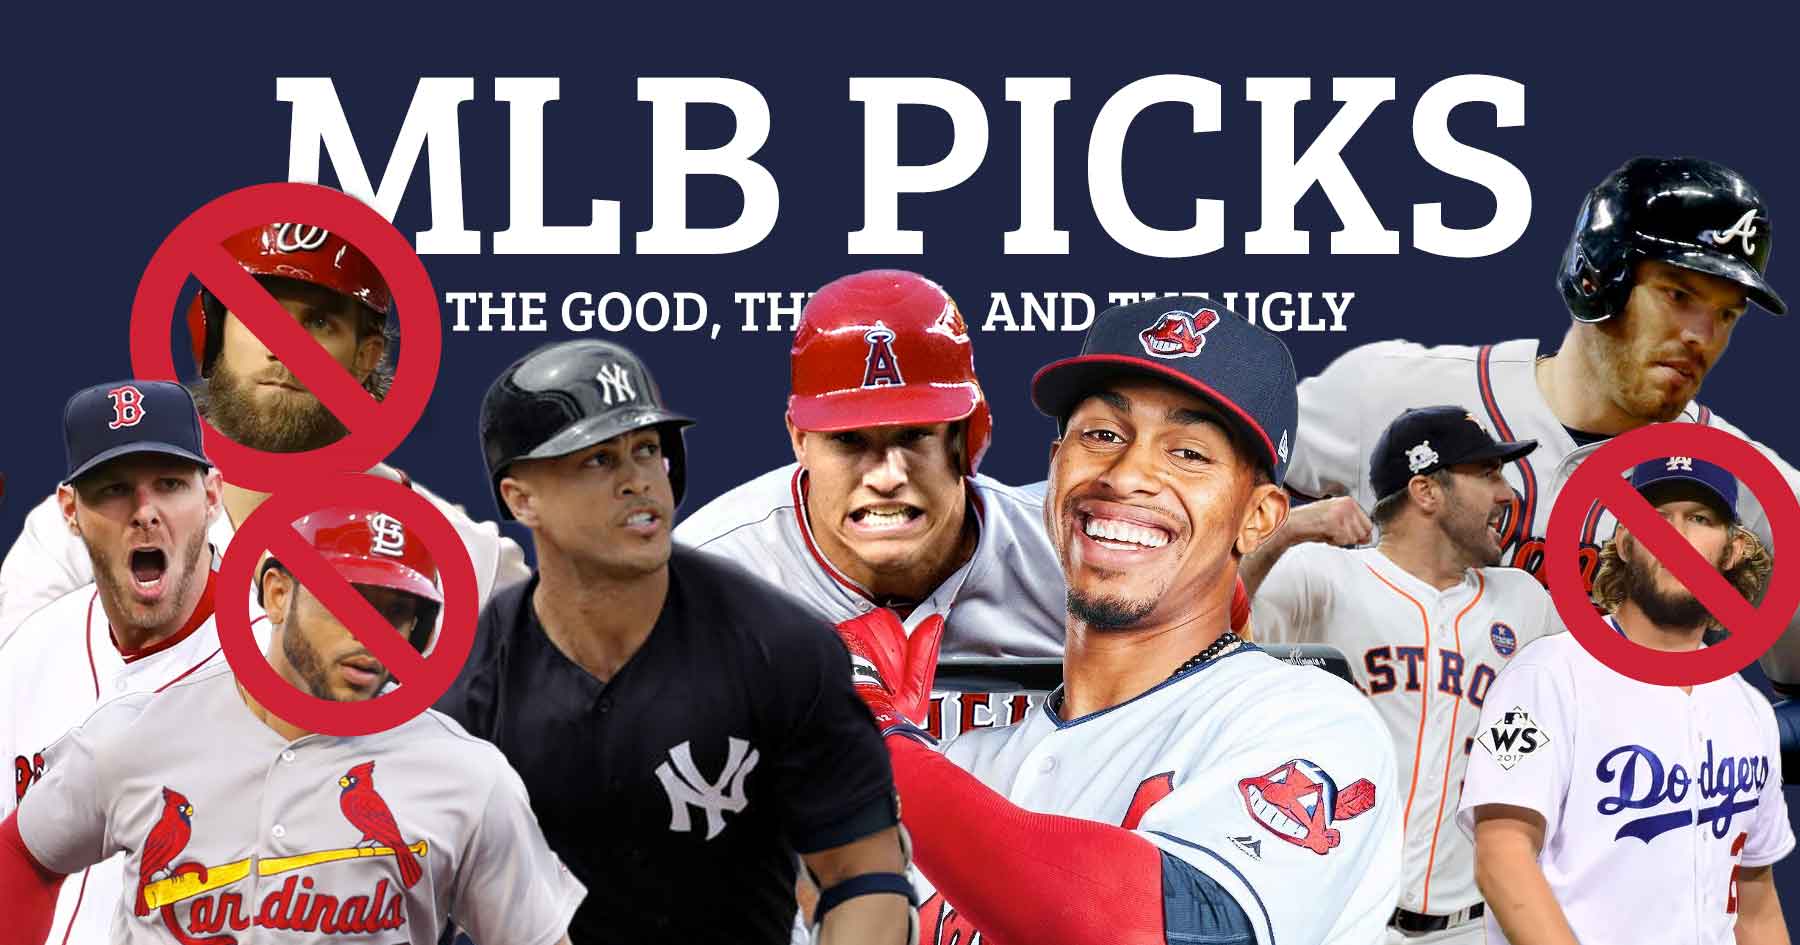 MLB Picks Recap: The Good, The Bad, and The Ugly